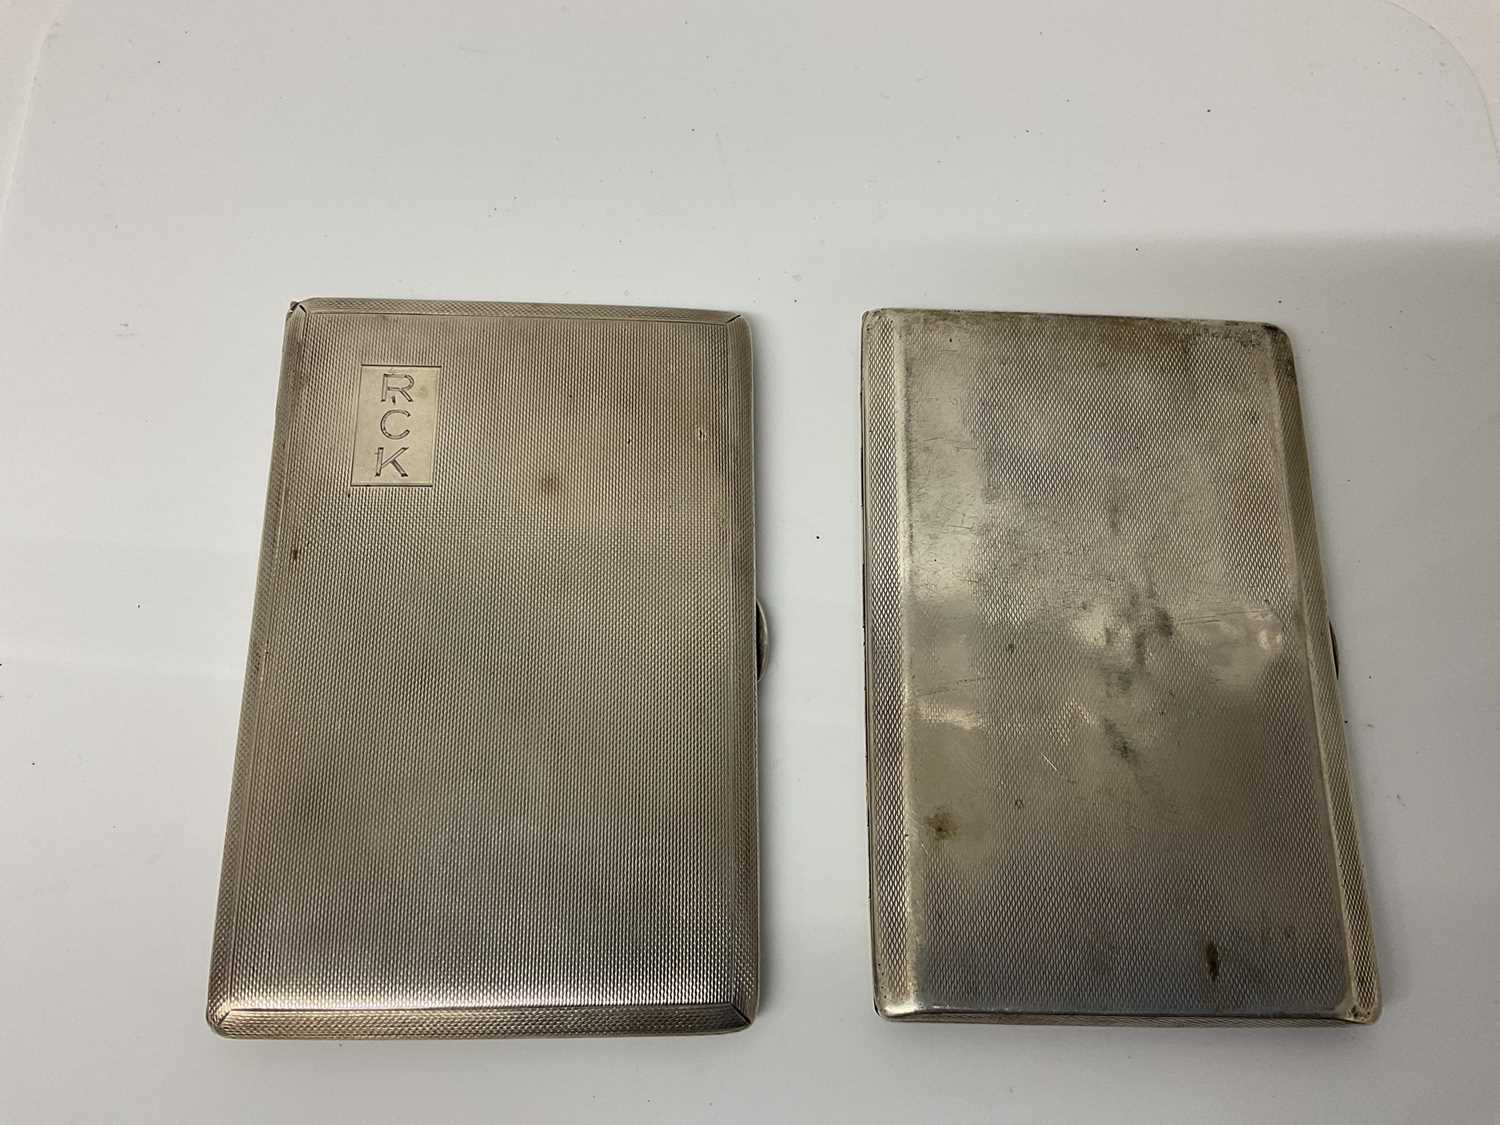 Lot 23 - George VI silver cigarette case of rectangular form with engine turned decoration and gilded interior, (Chester 1941), maker Cohen & Charles, 12.7cm in overall length, together with another similar...